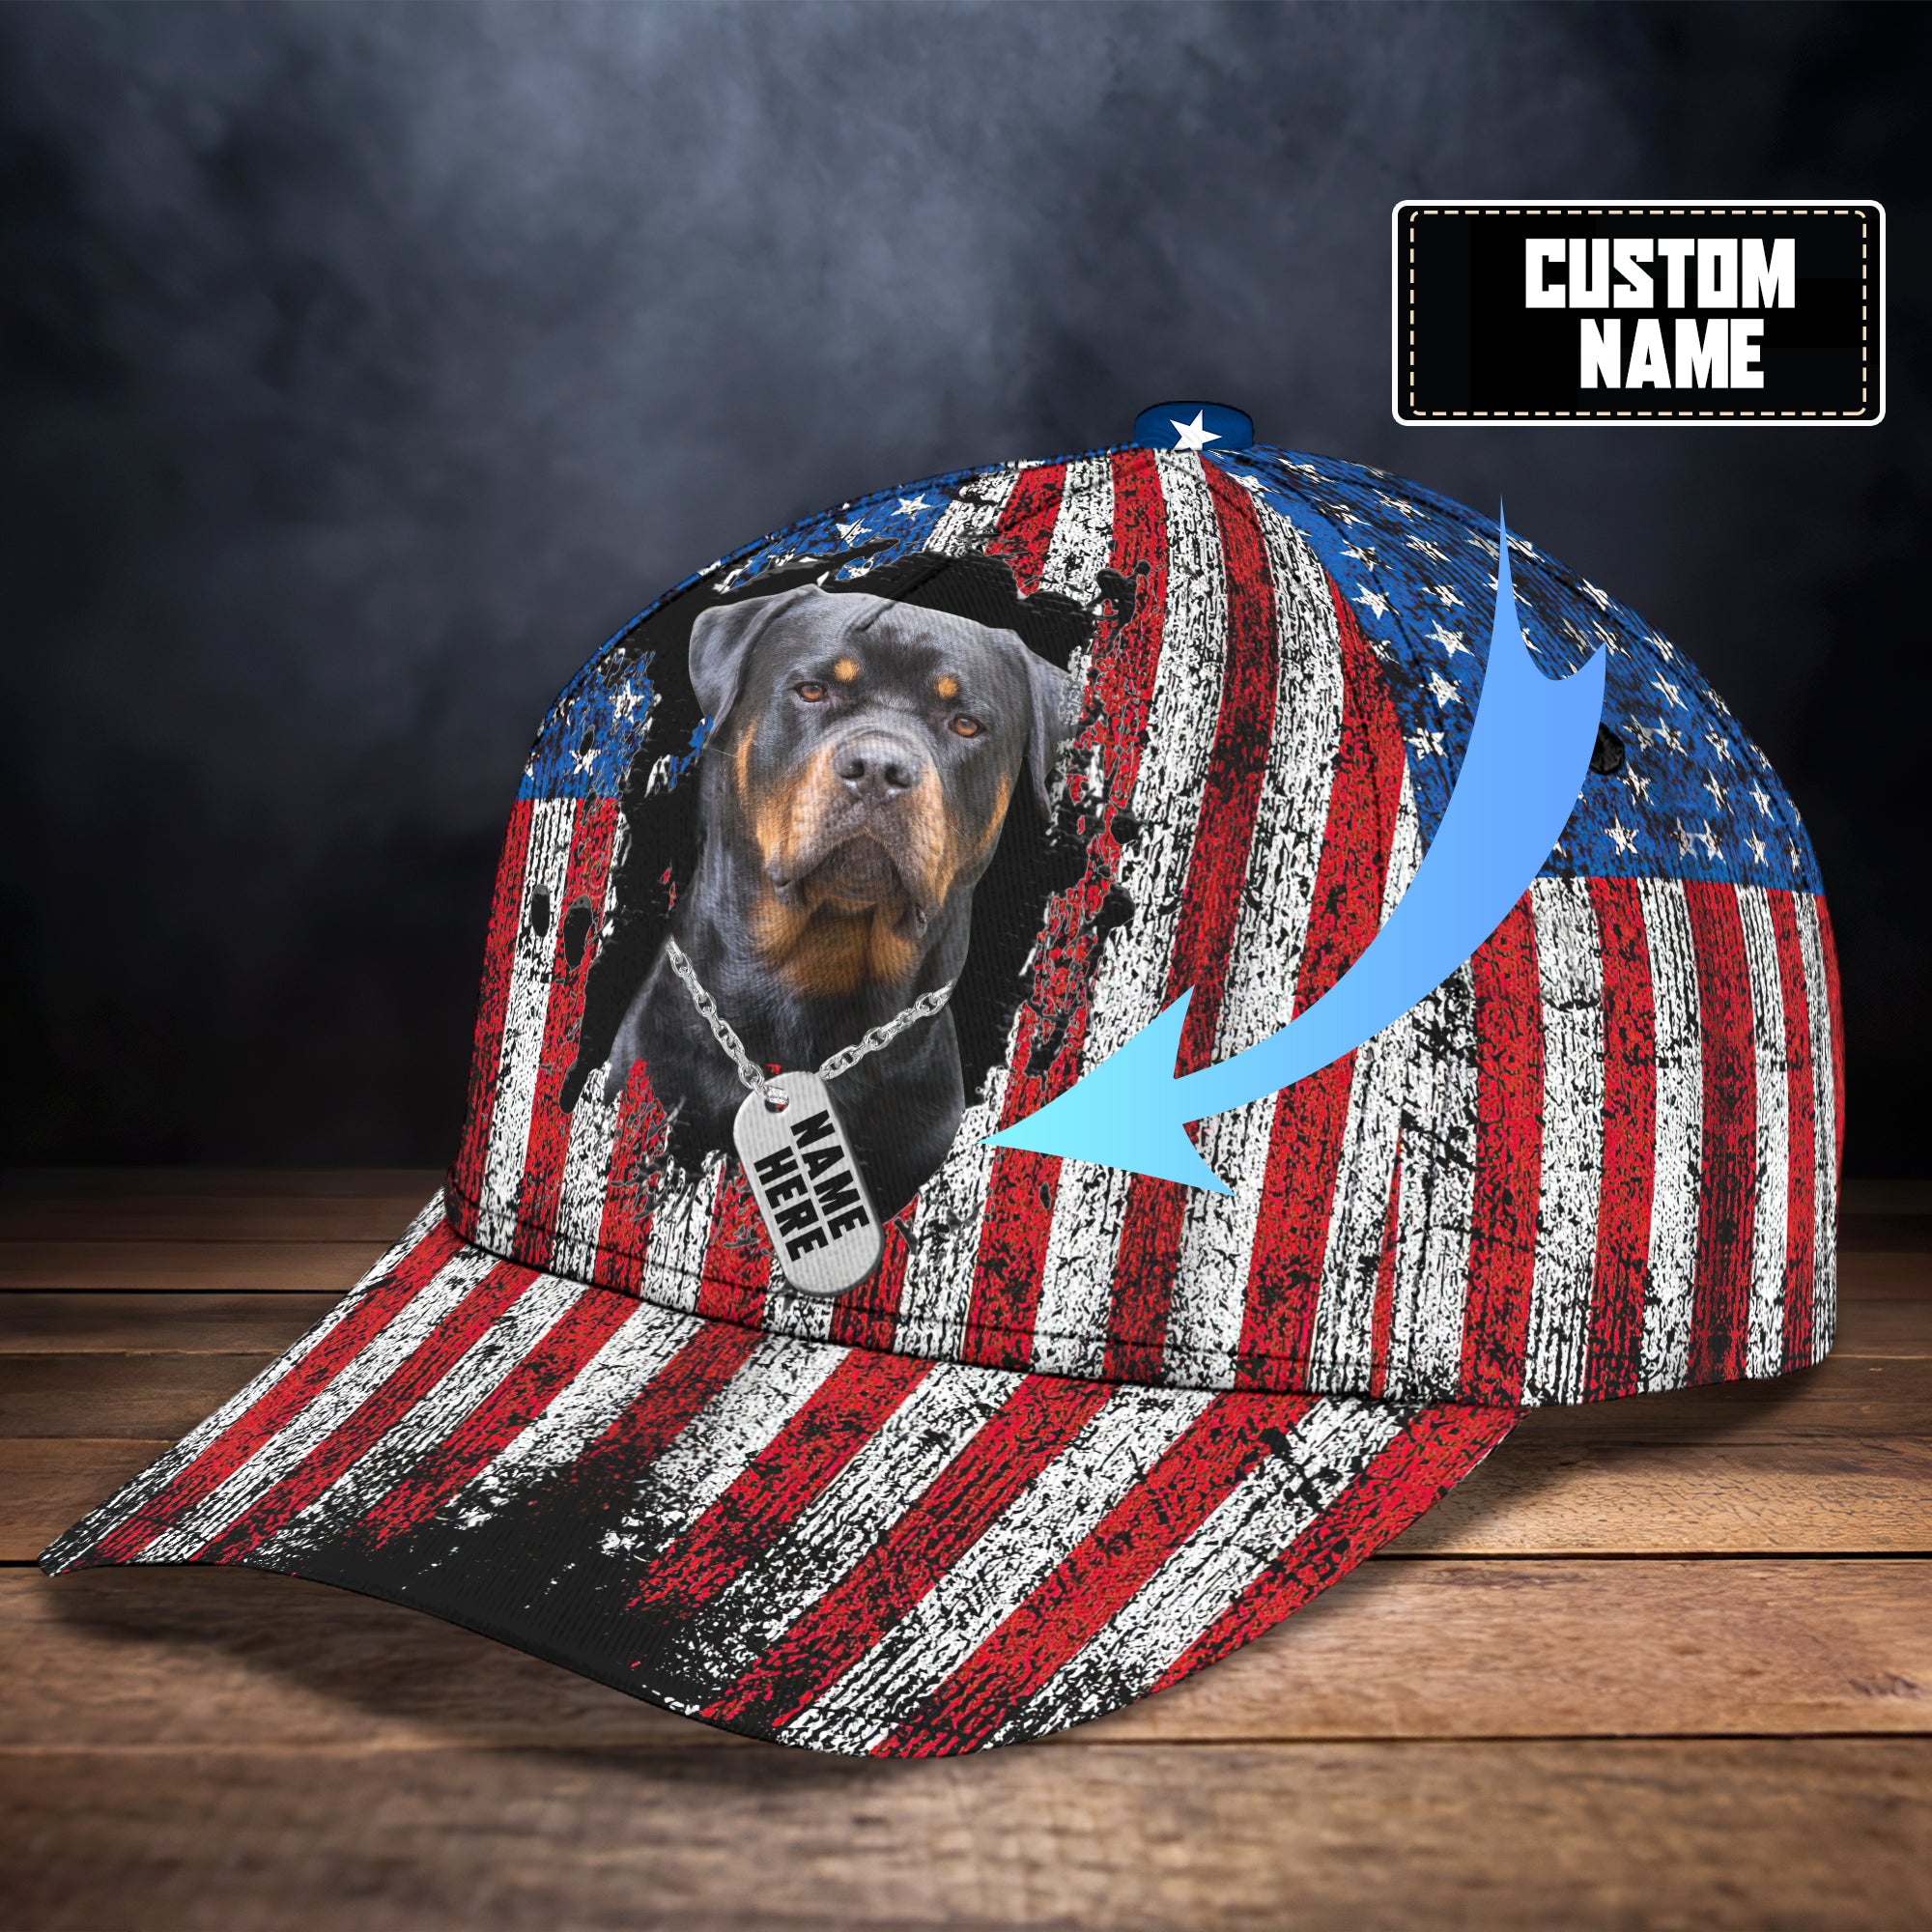 Rottweiler 1 - Personalized Name Cap - HY97